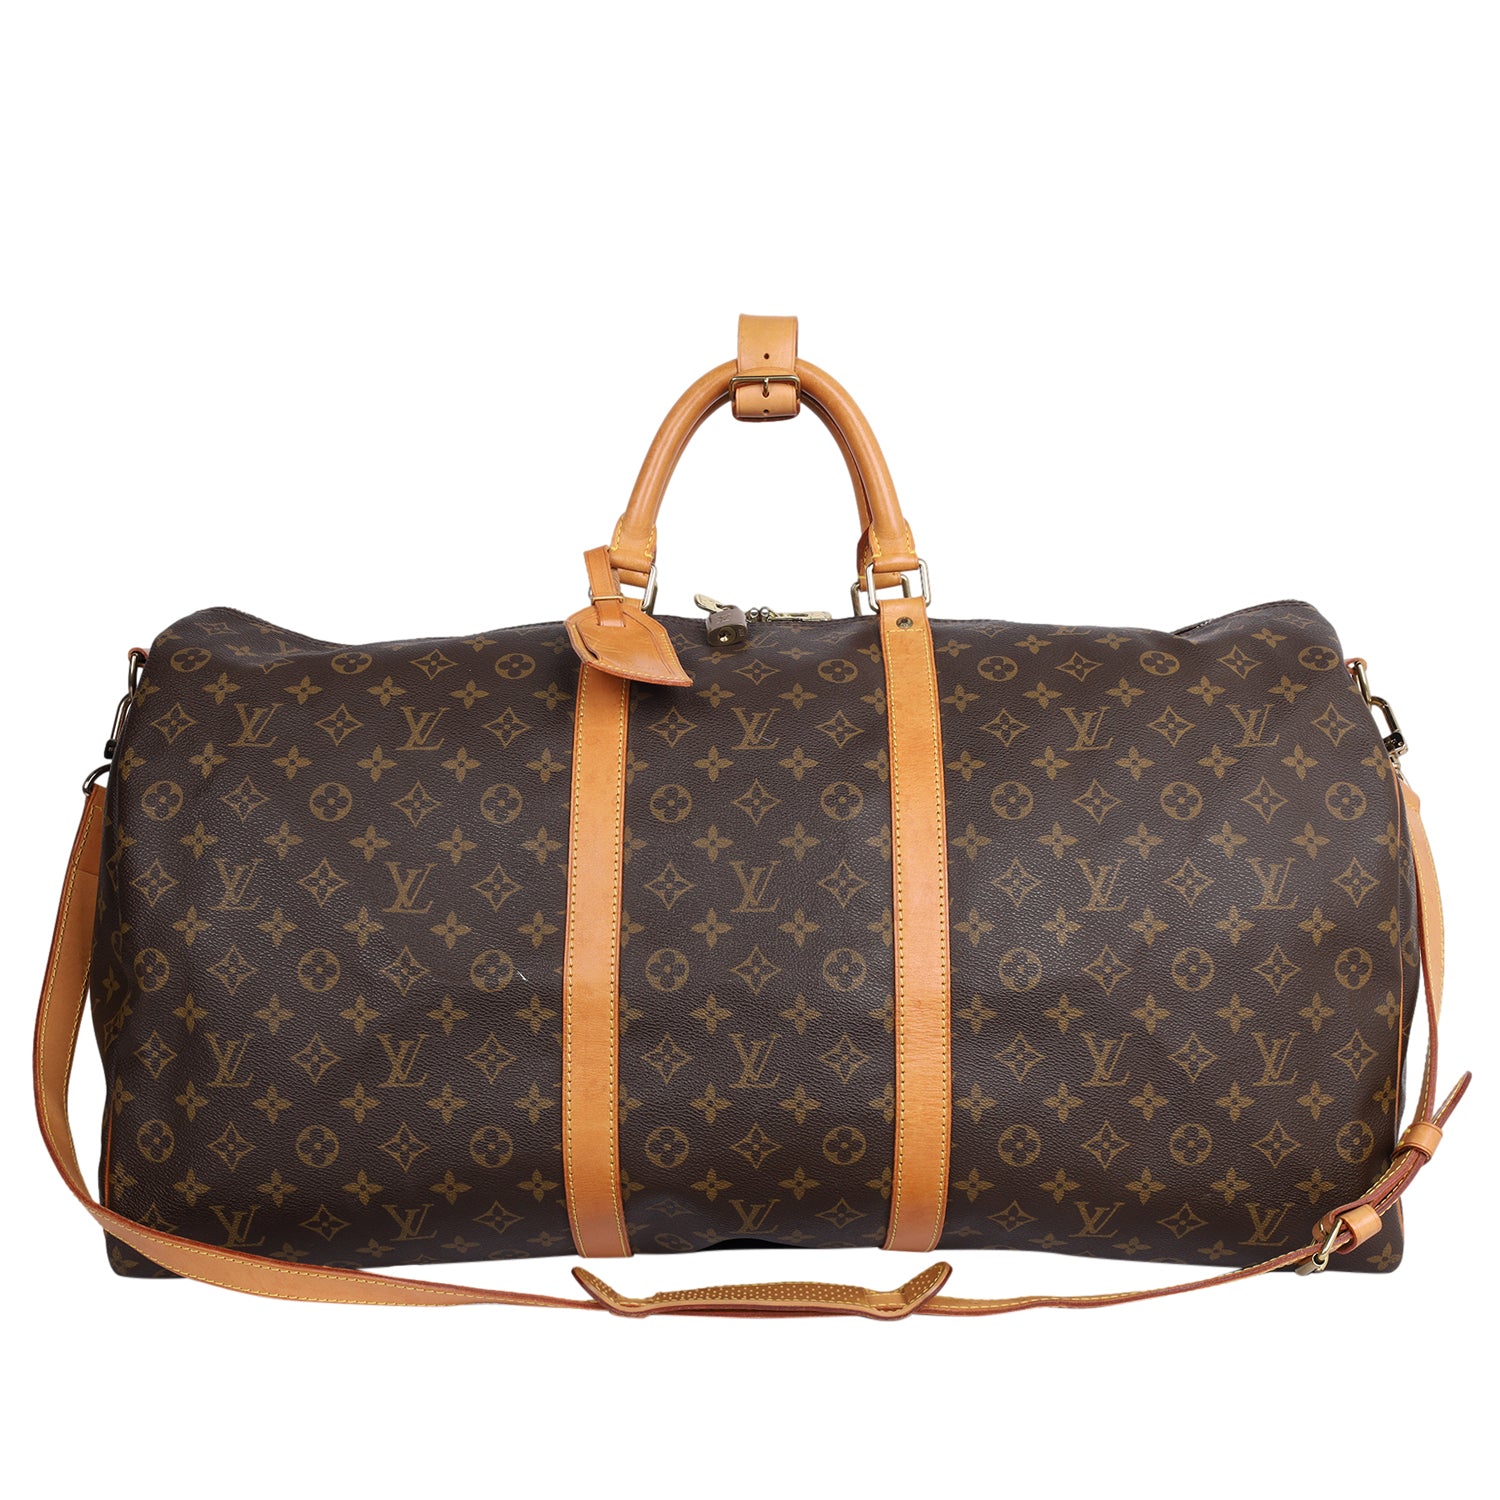 Sold x RARE LV America's Cup Keepall 55  Louis vuitton travel bags, Americas  cup, Keepall